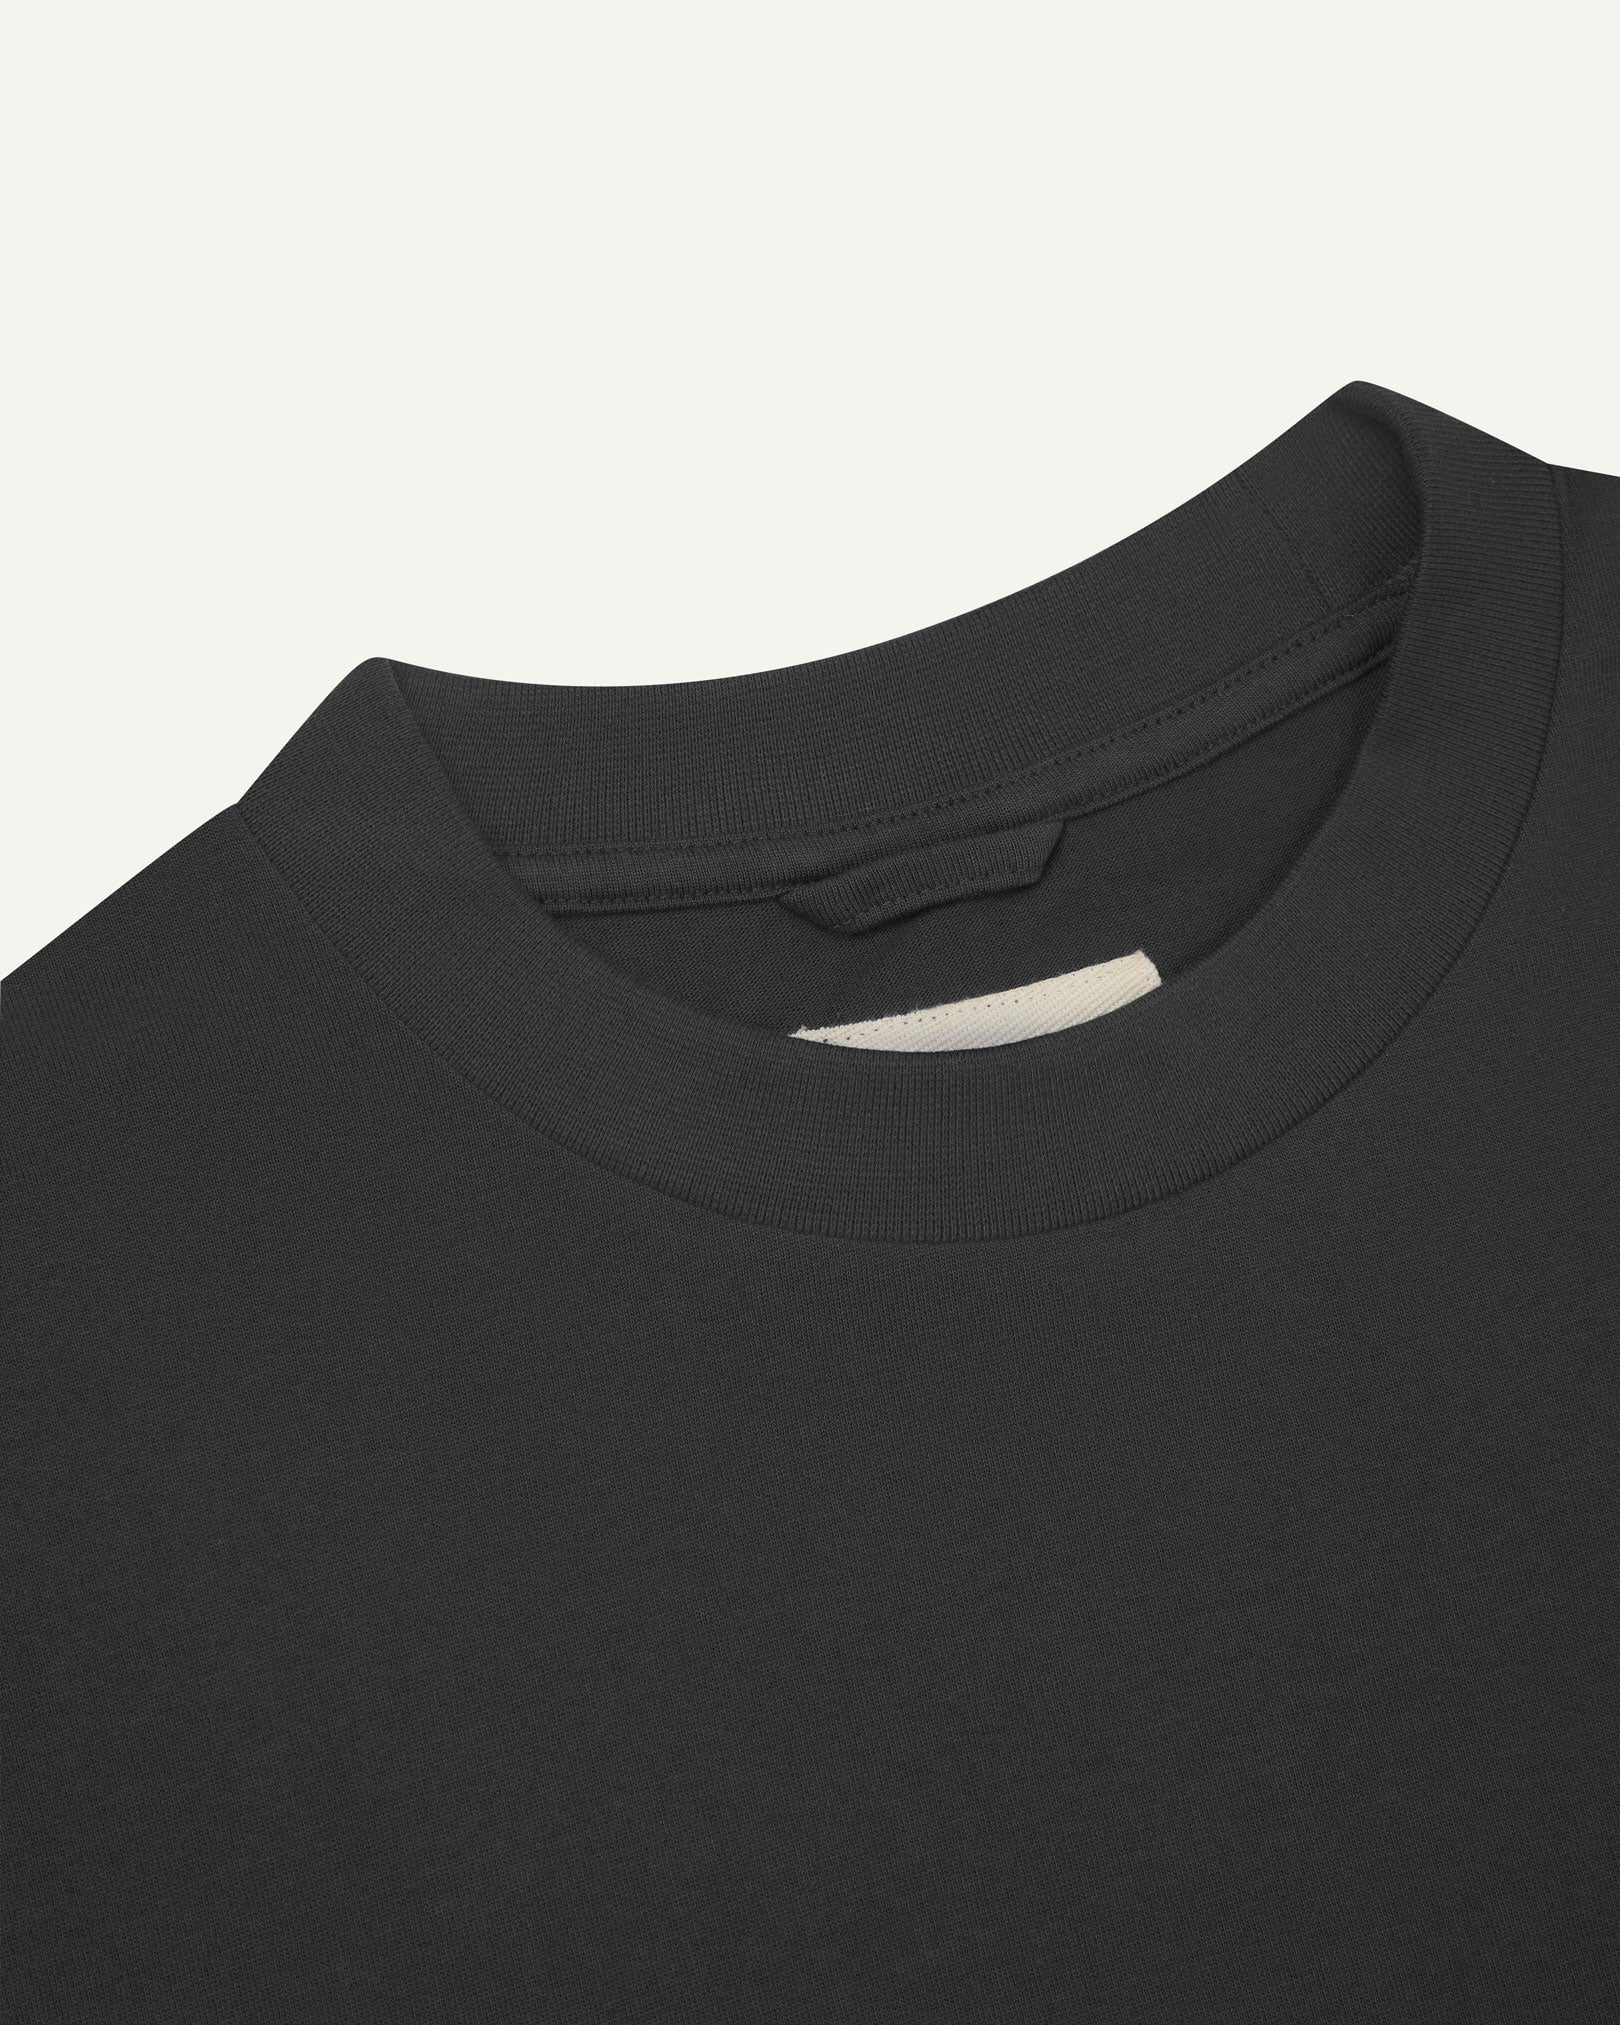 Neckline close-up of faded black organic cotton oversized T-shirt showing hanging loop and Uskees branding label.